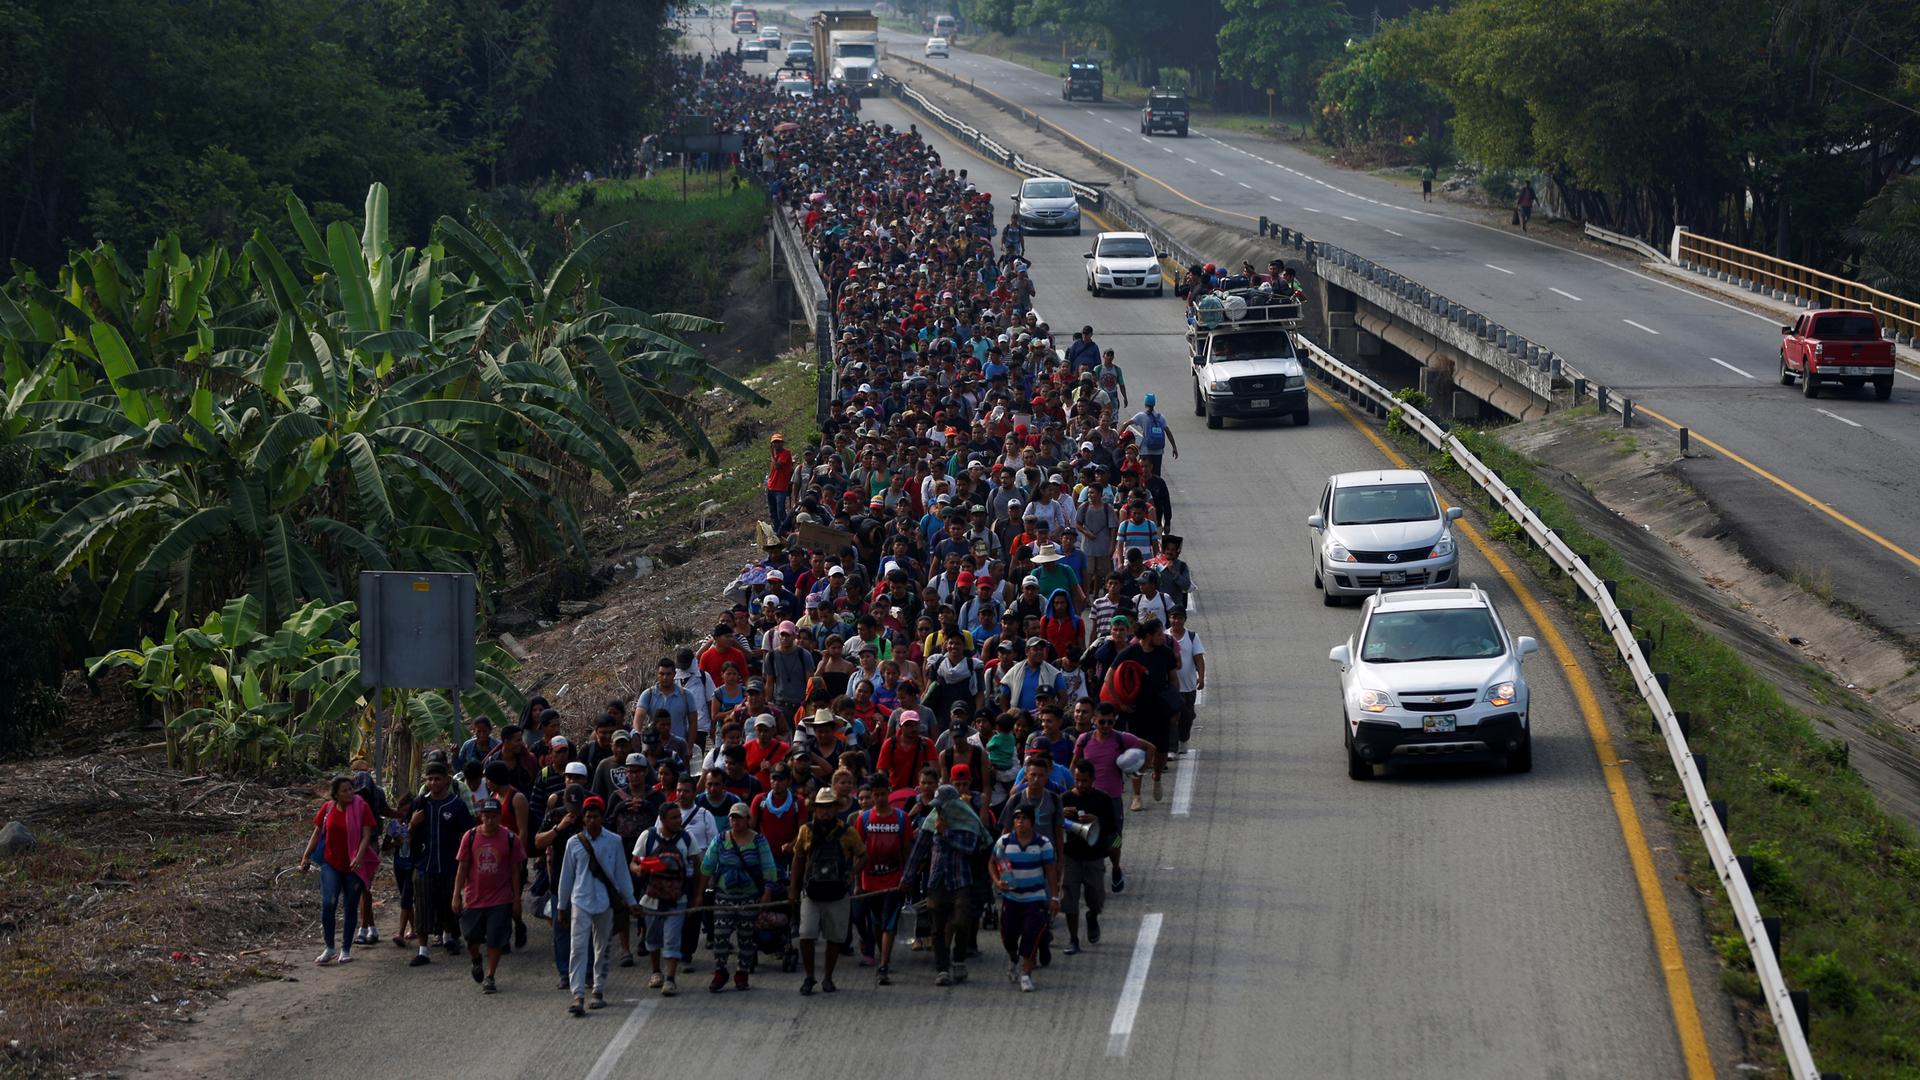 A long line of people, hundreds and hundreds, walk in one lane of a highway in a large mass.